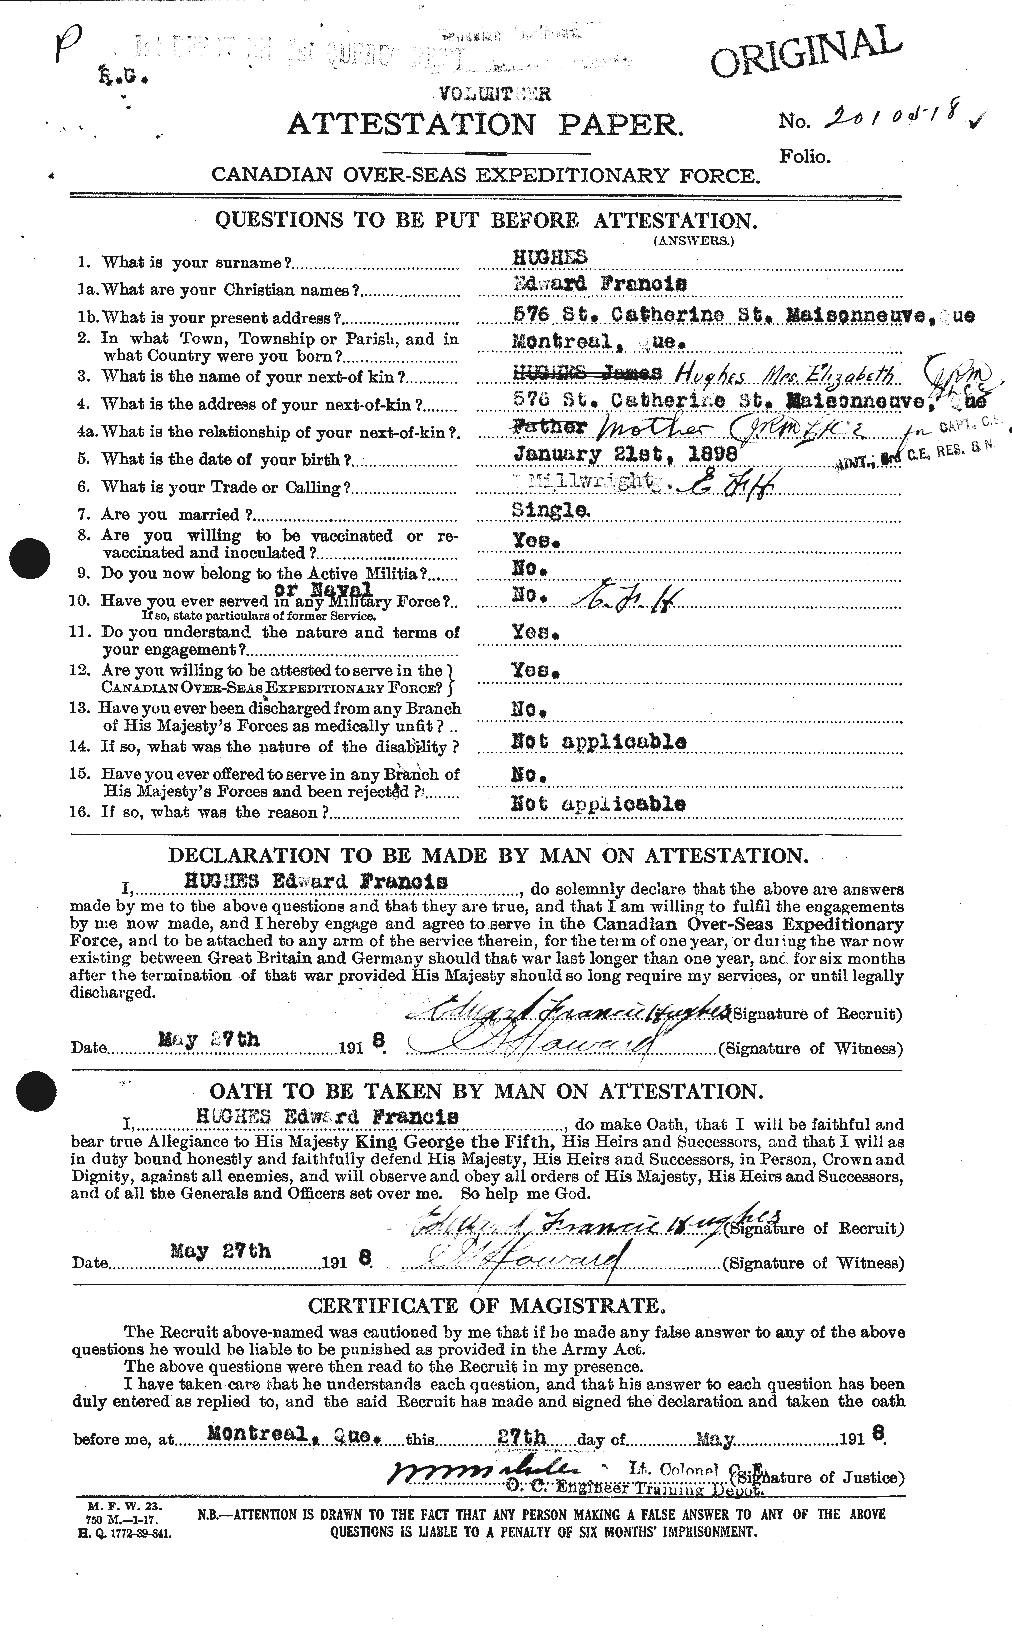 Personnel Records of the First World War - CEF 402684a